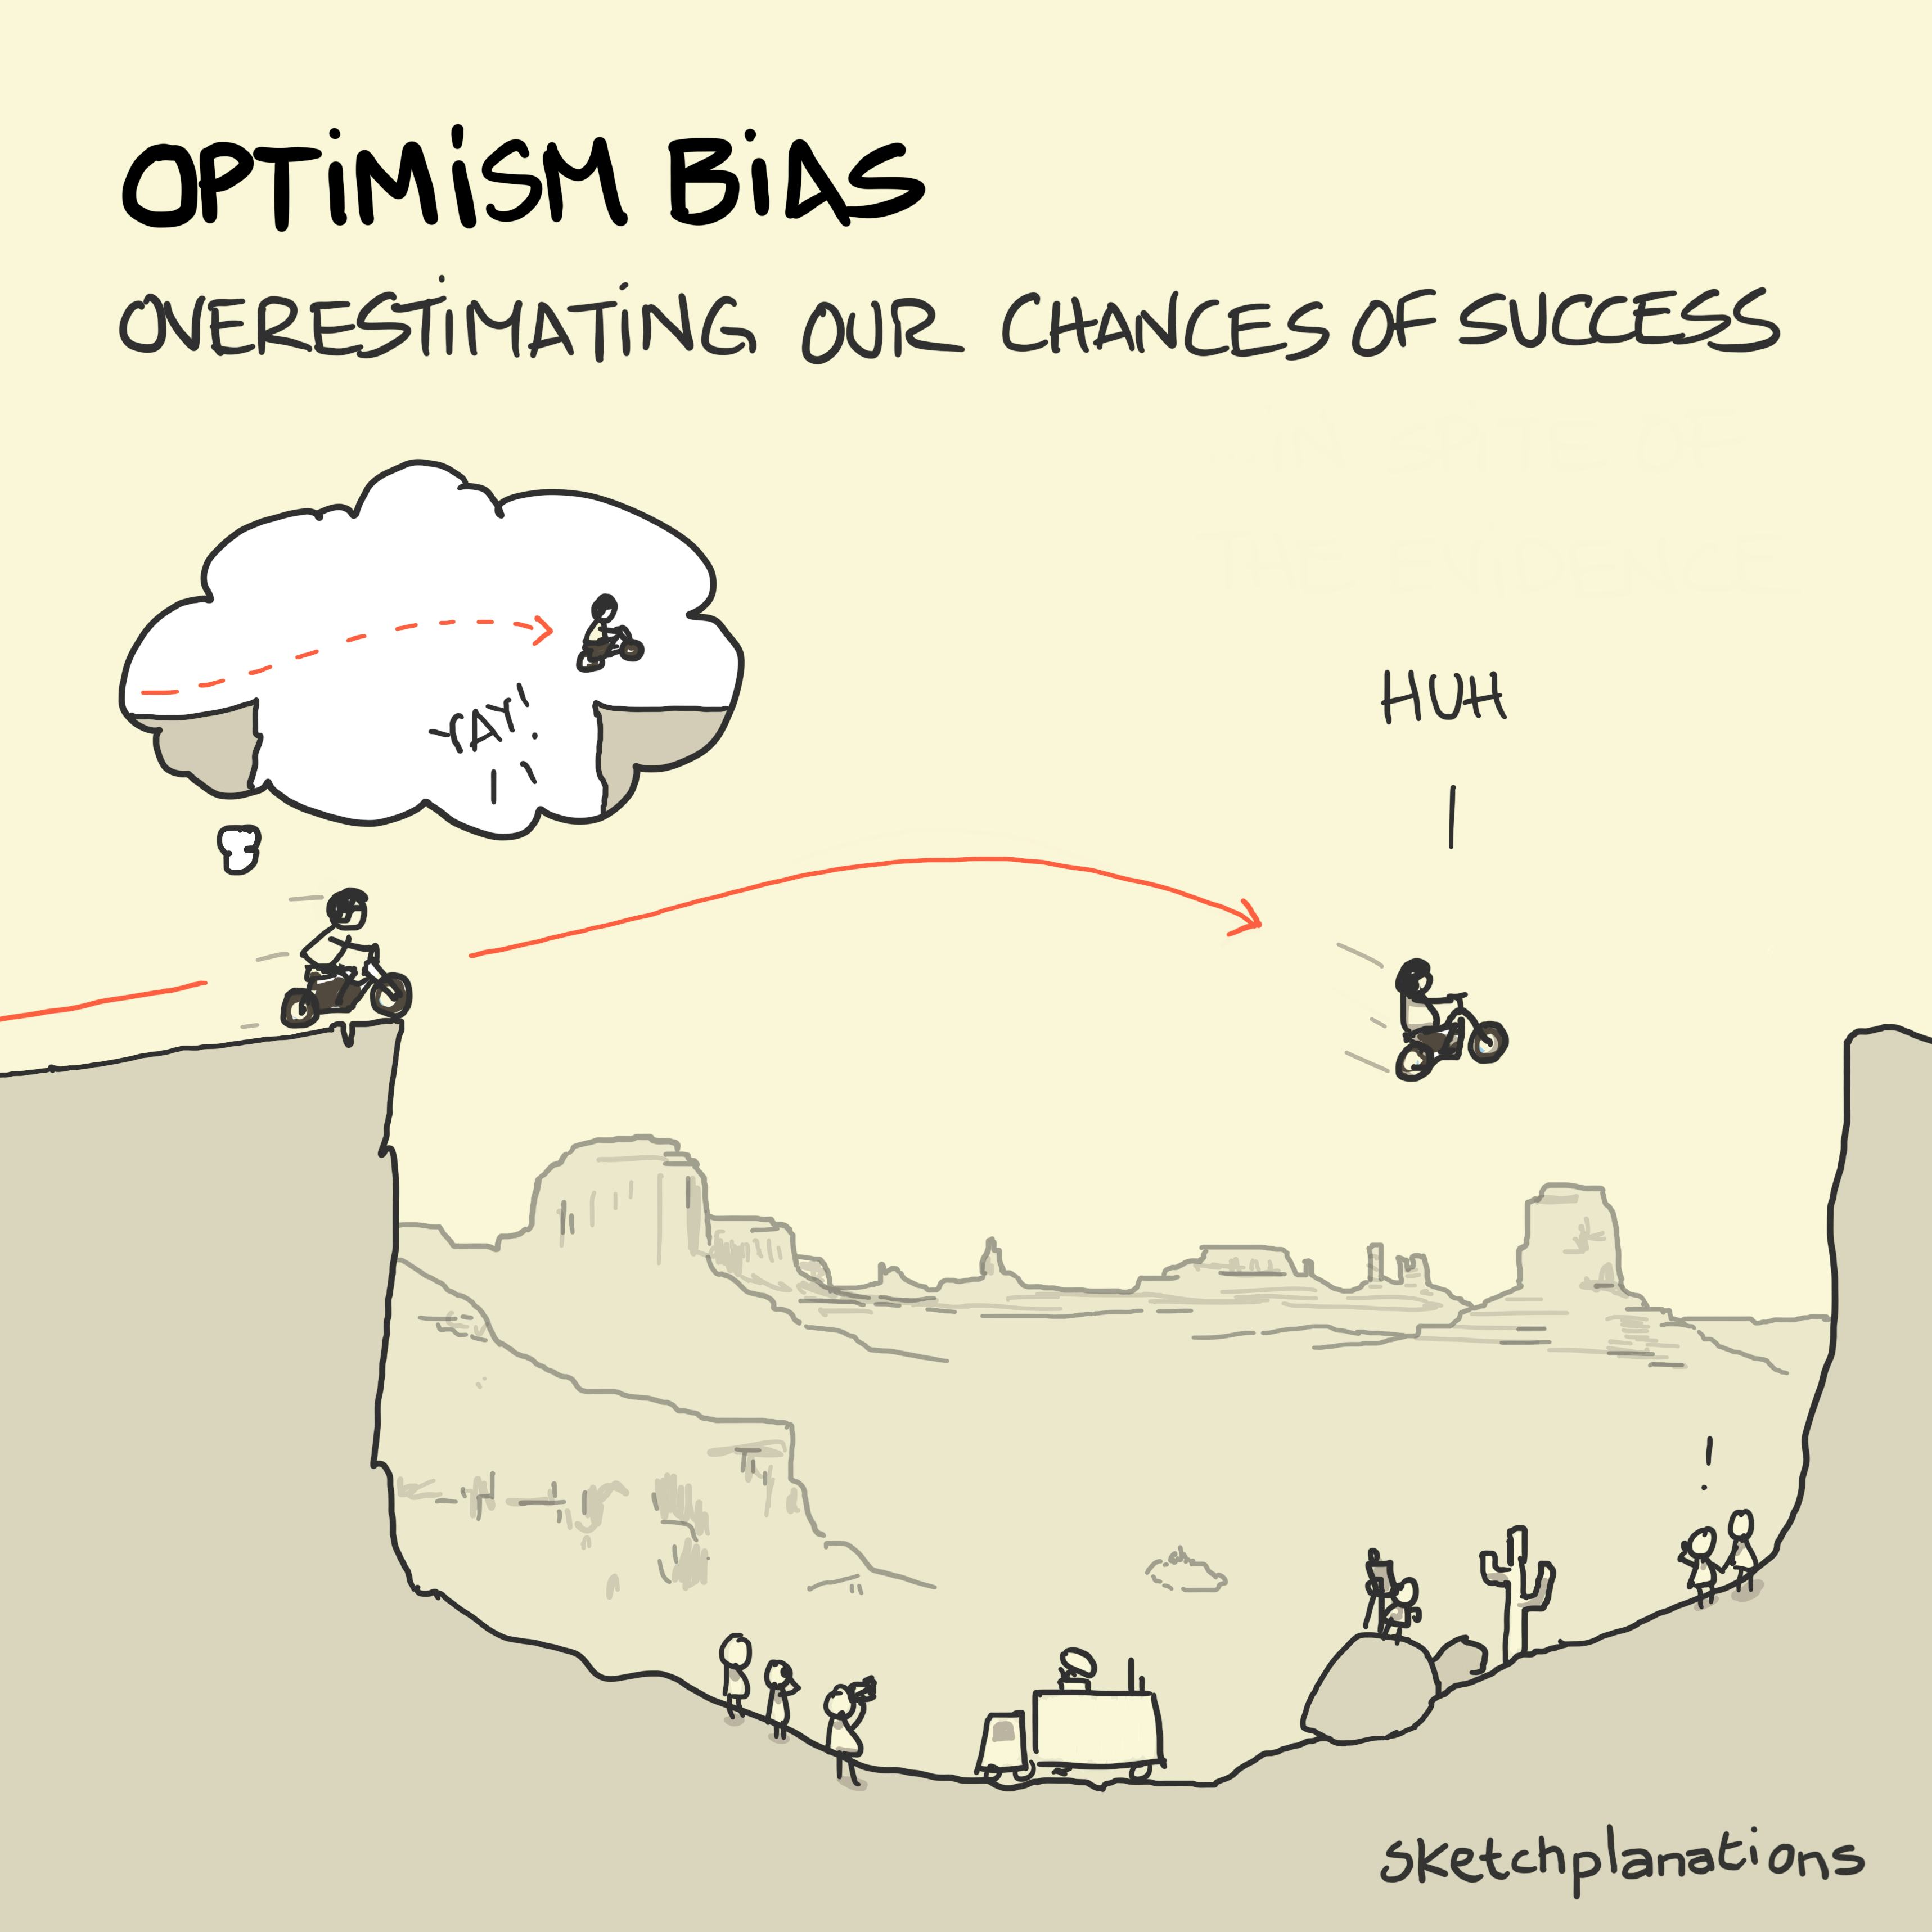 Optimism bias illustration: A stunt rider overestimates their chance of leaping a canyon thanks to optimism bias. Various onlookers gasp. "Huh" says the rider